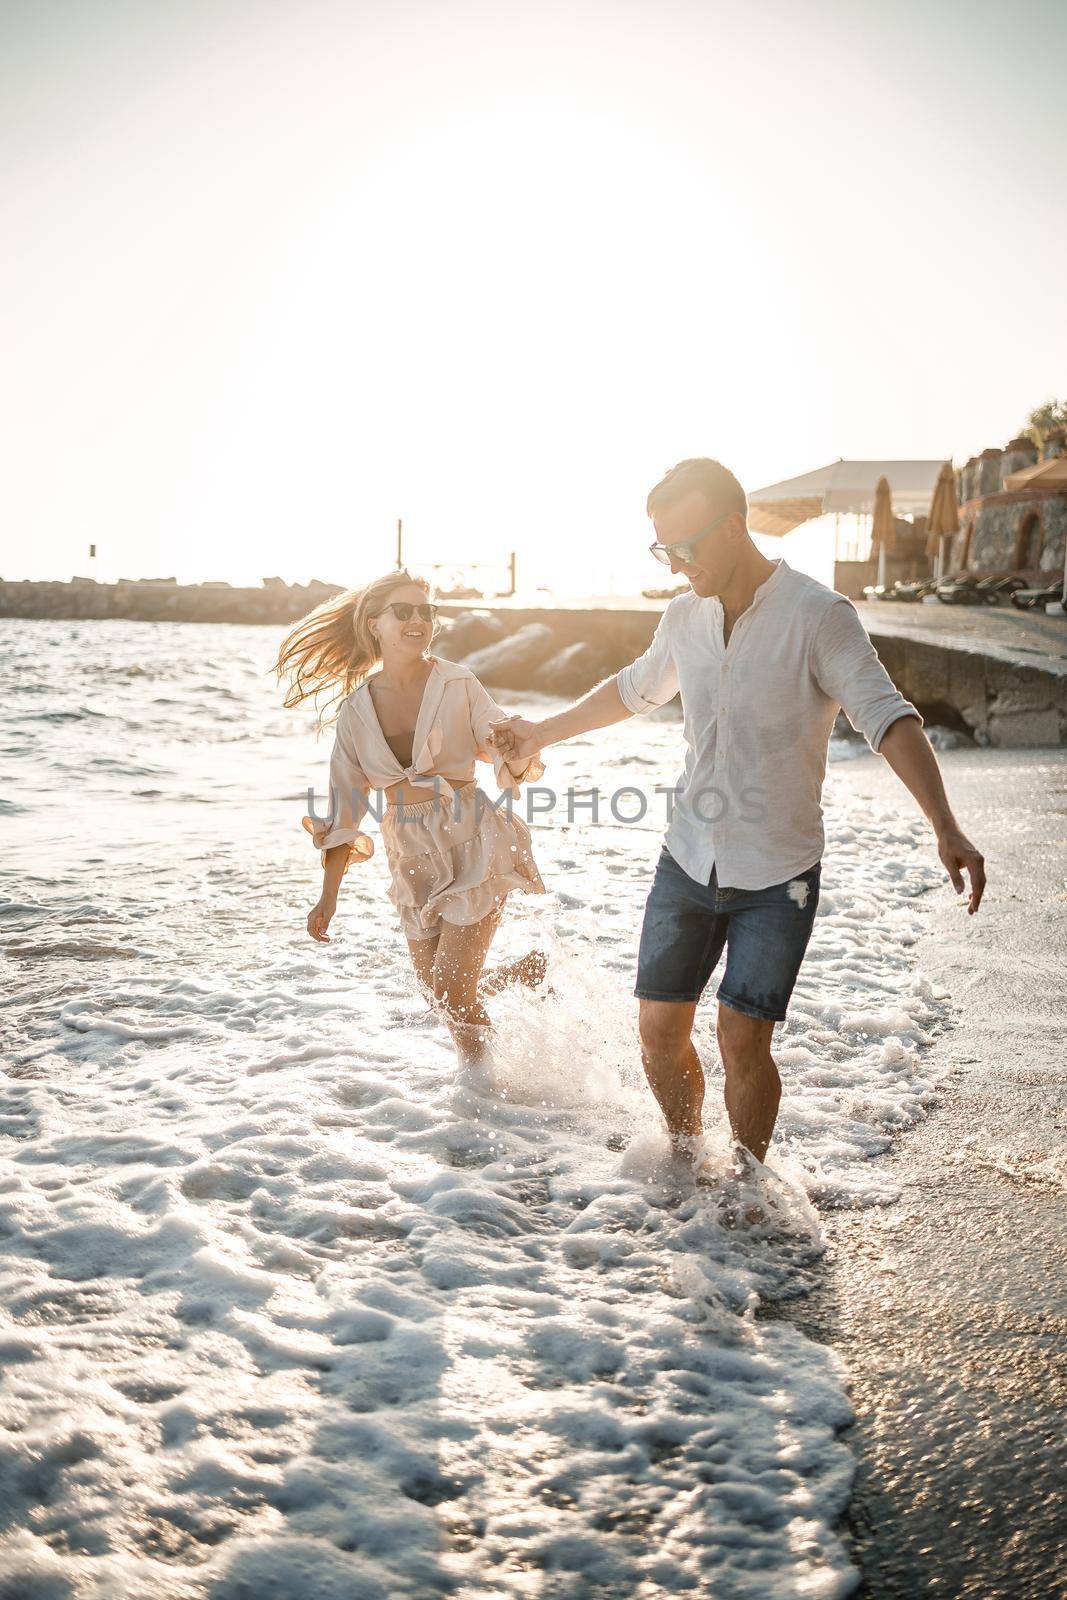 A couple in love is walking on the beach near the sea. Young family at sunset by the mediterranean sea. Summer vacation concept by Dmitrytph